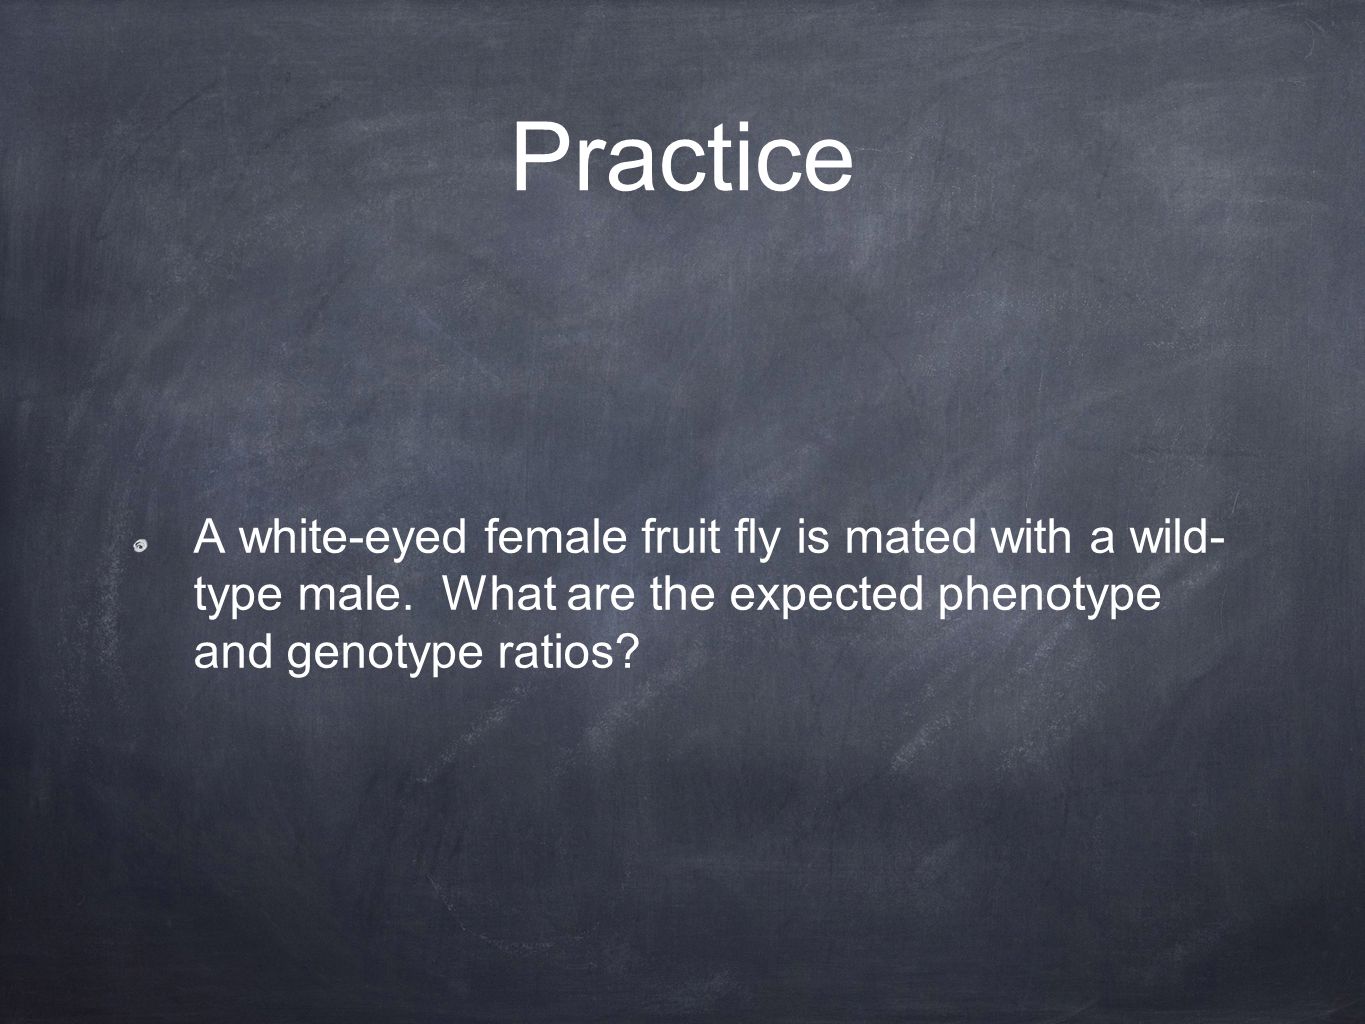 Practice A white-eyed female fruit fly is mated with a wild- type male.